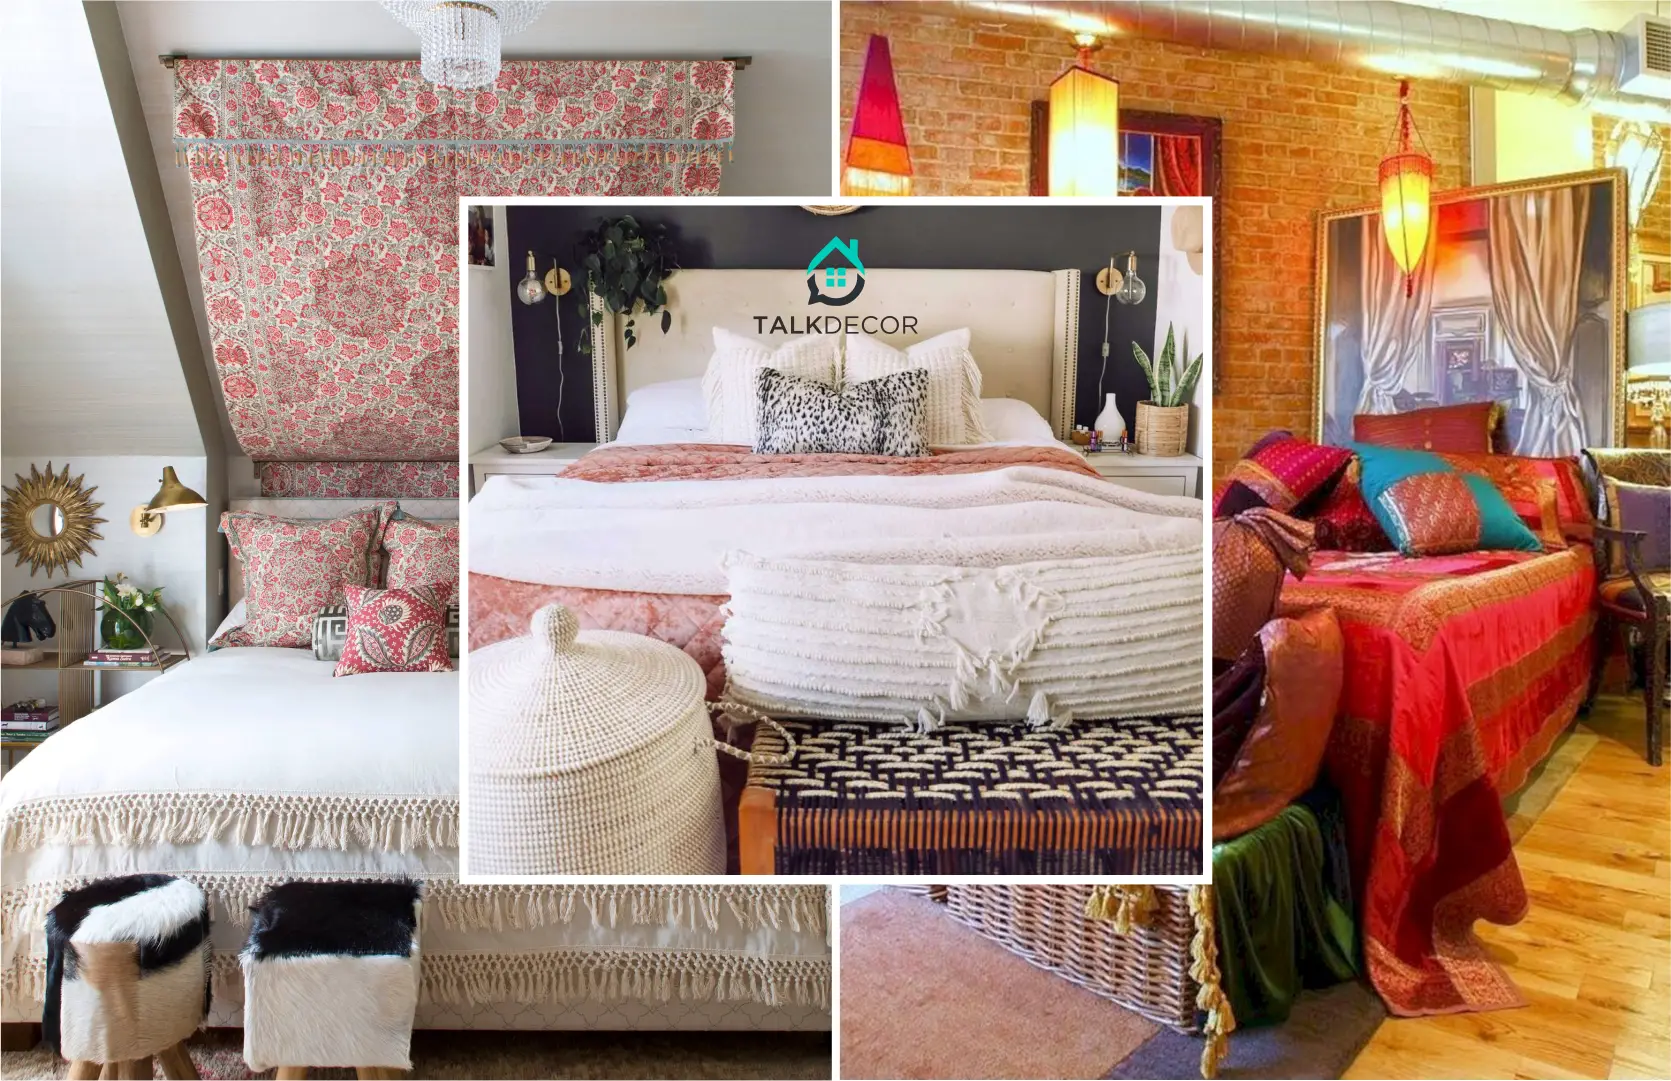 5 Tips to Start Your Very Own Boho Bedroom